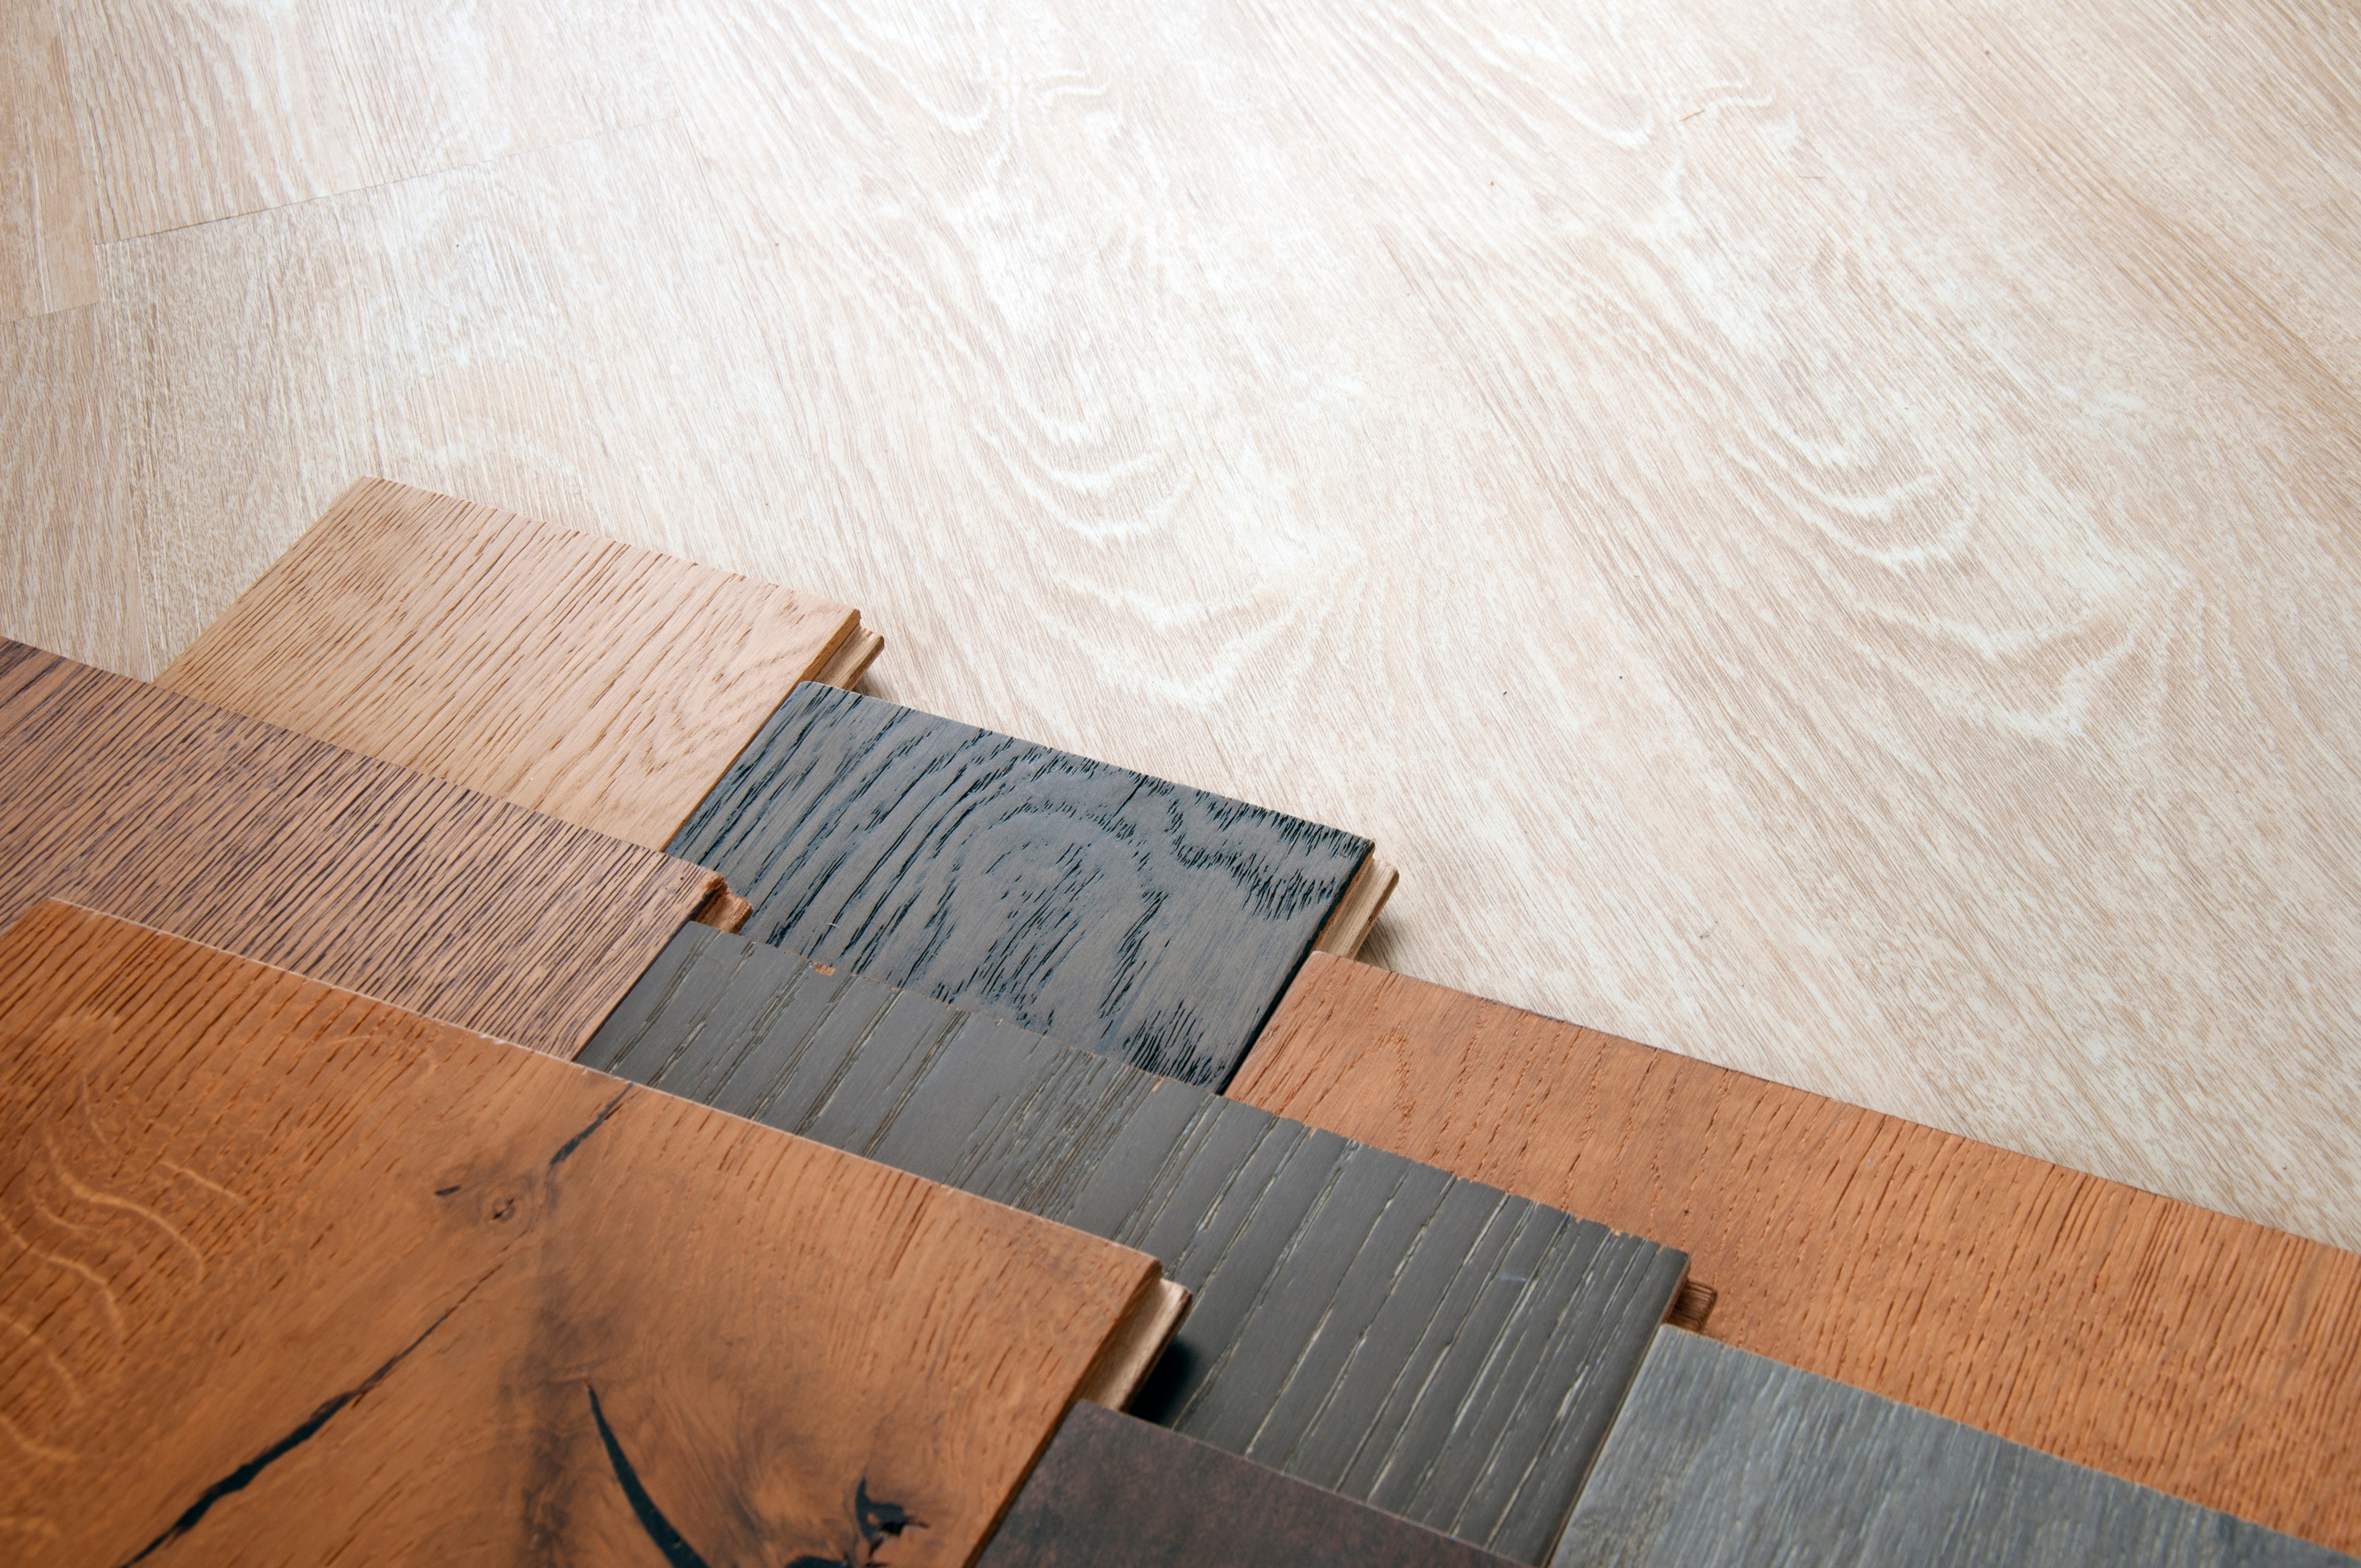 Prefinished Hardwood Flooring Is It, Cost To Install Prefinished Hardwood Flooring